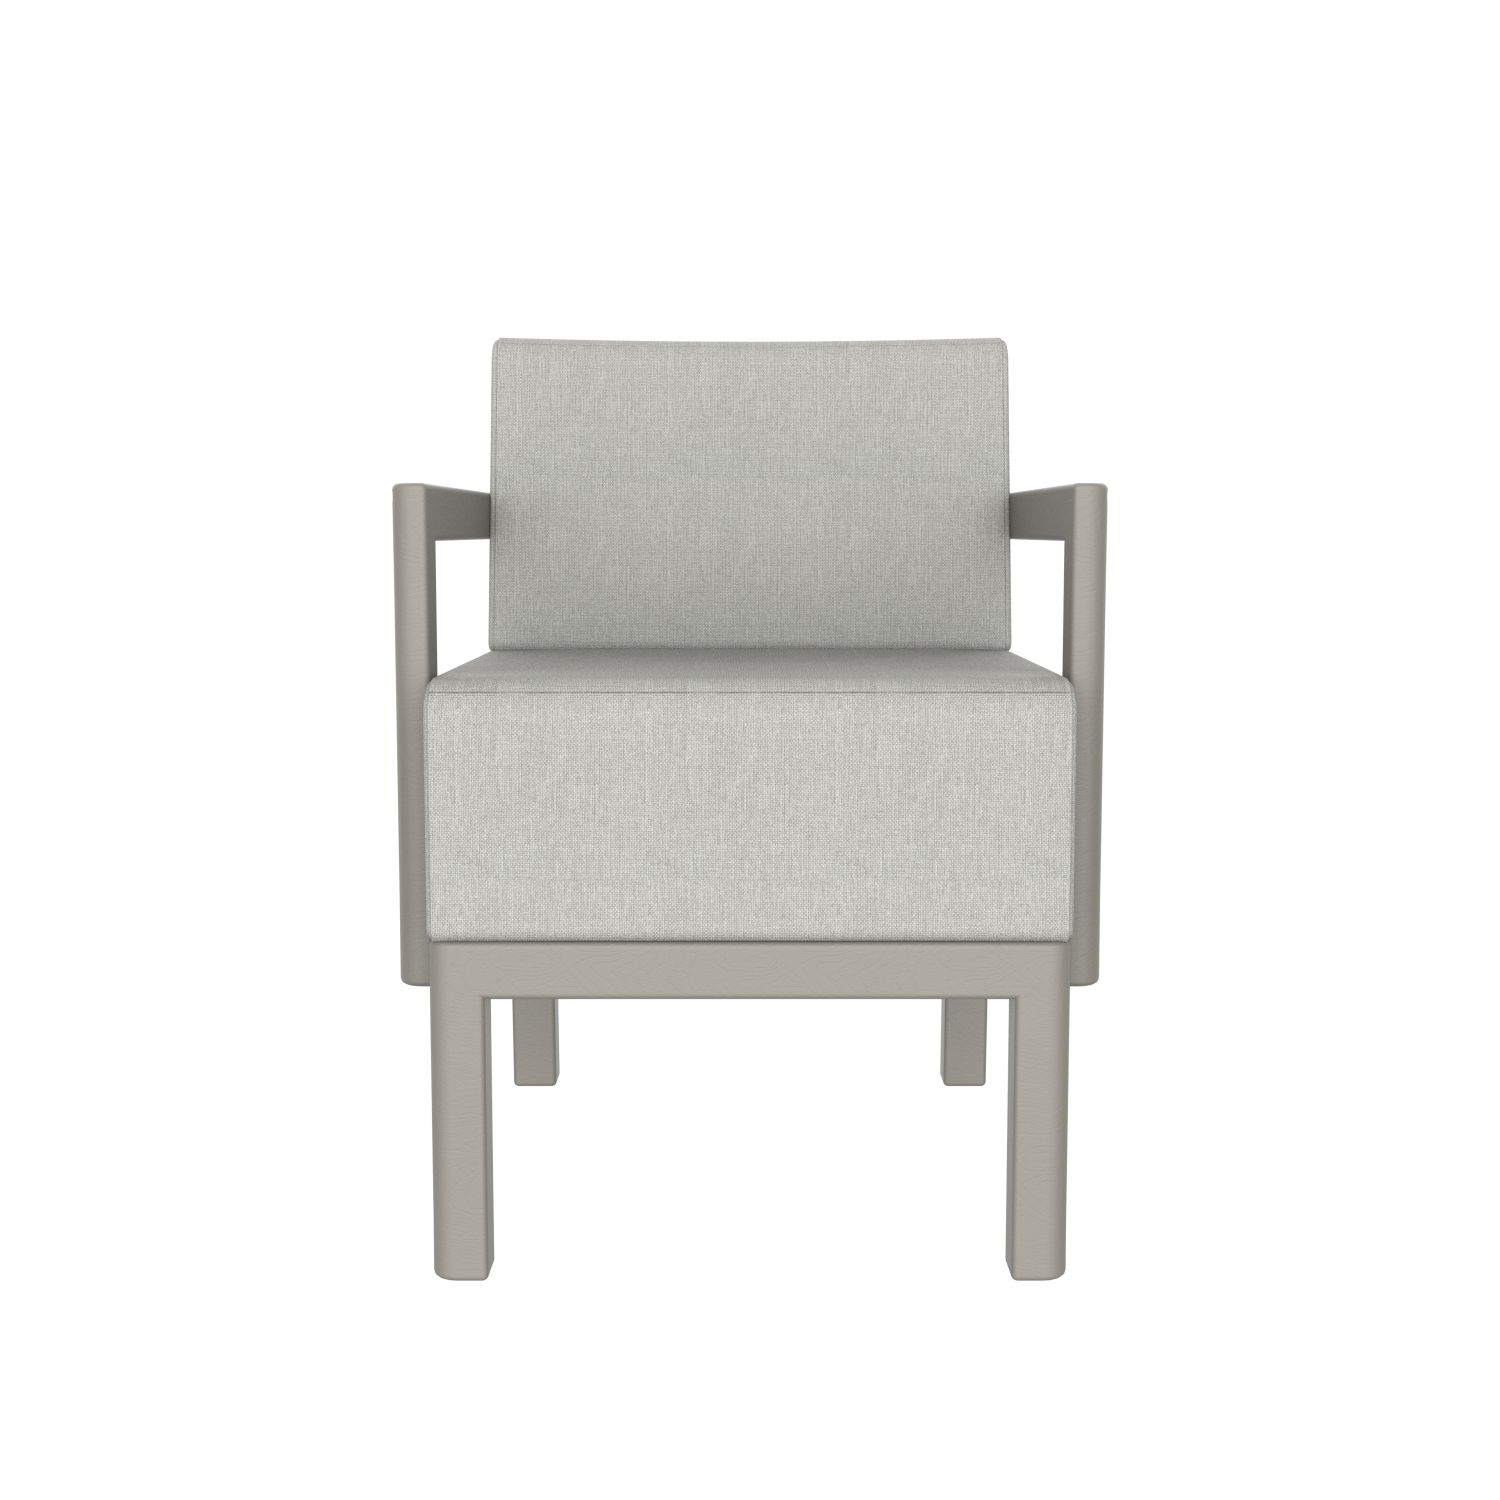 lensvelt piet boon chair 02 with armrests board light grey 06 price level 1 stone grey ral7030 hard leg ends